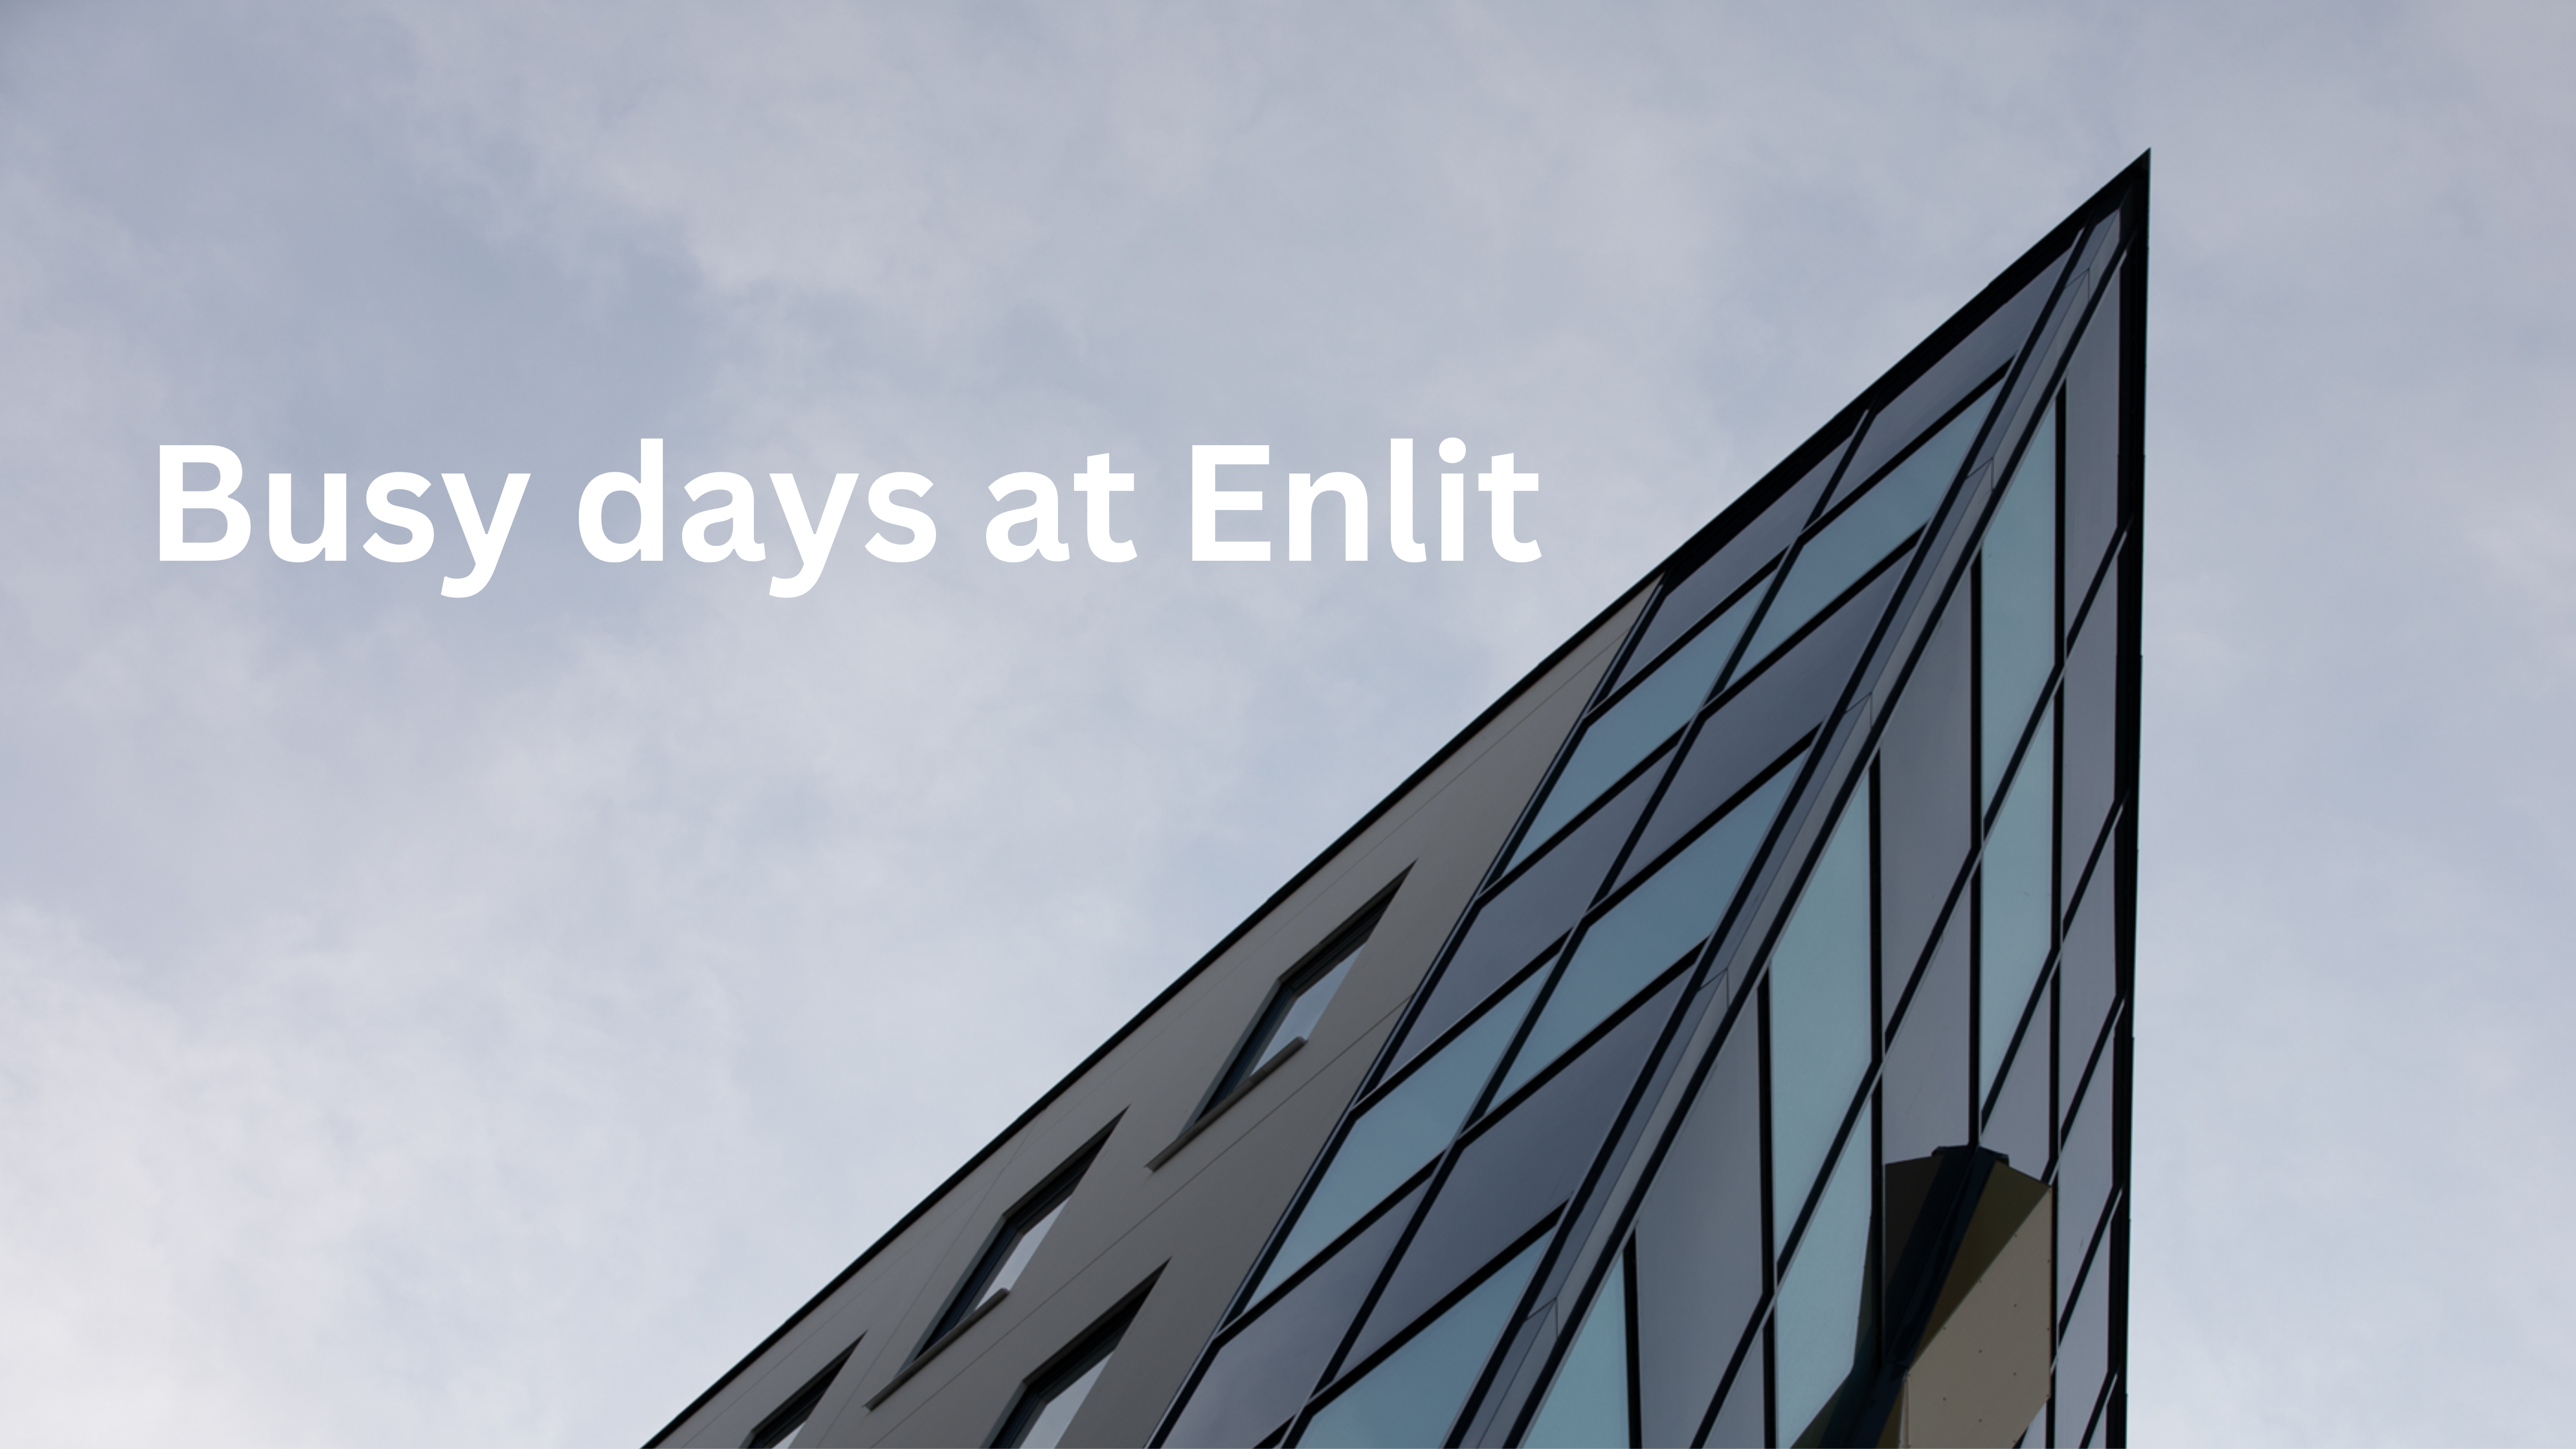 Busy days at Enlit banner